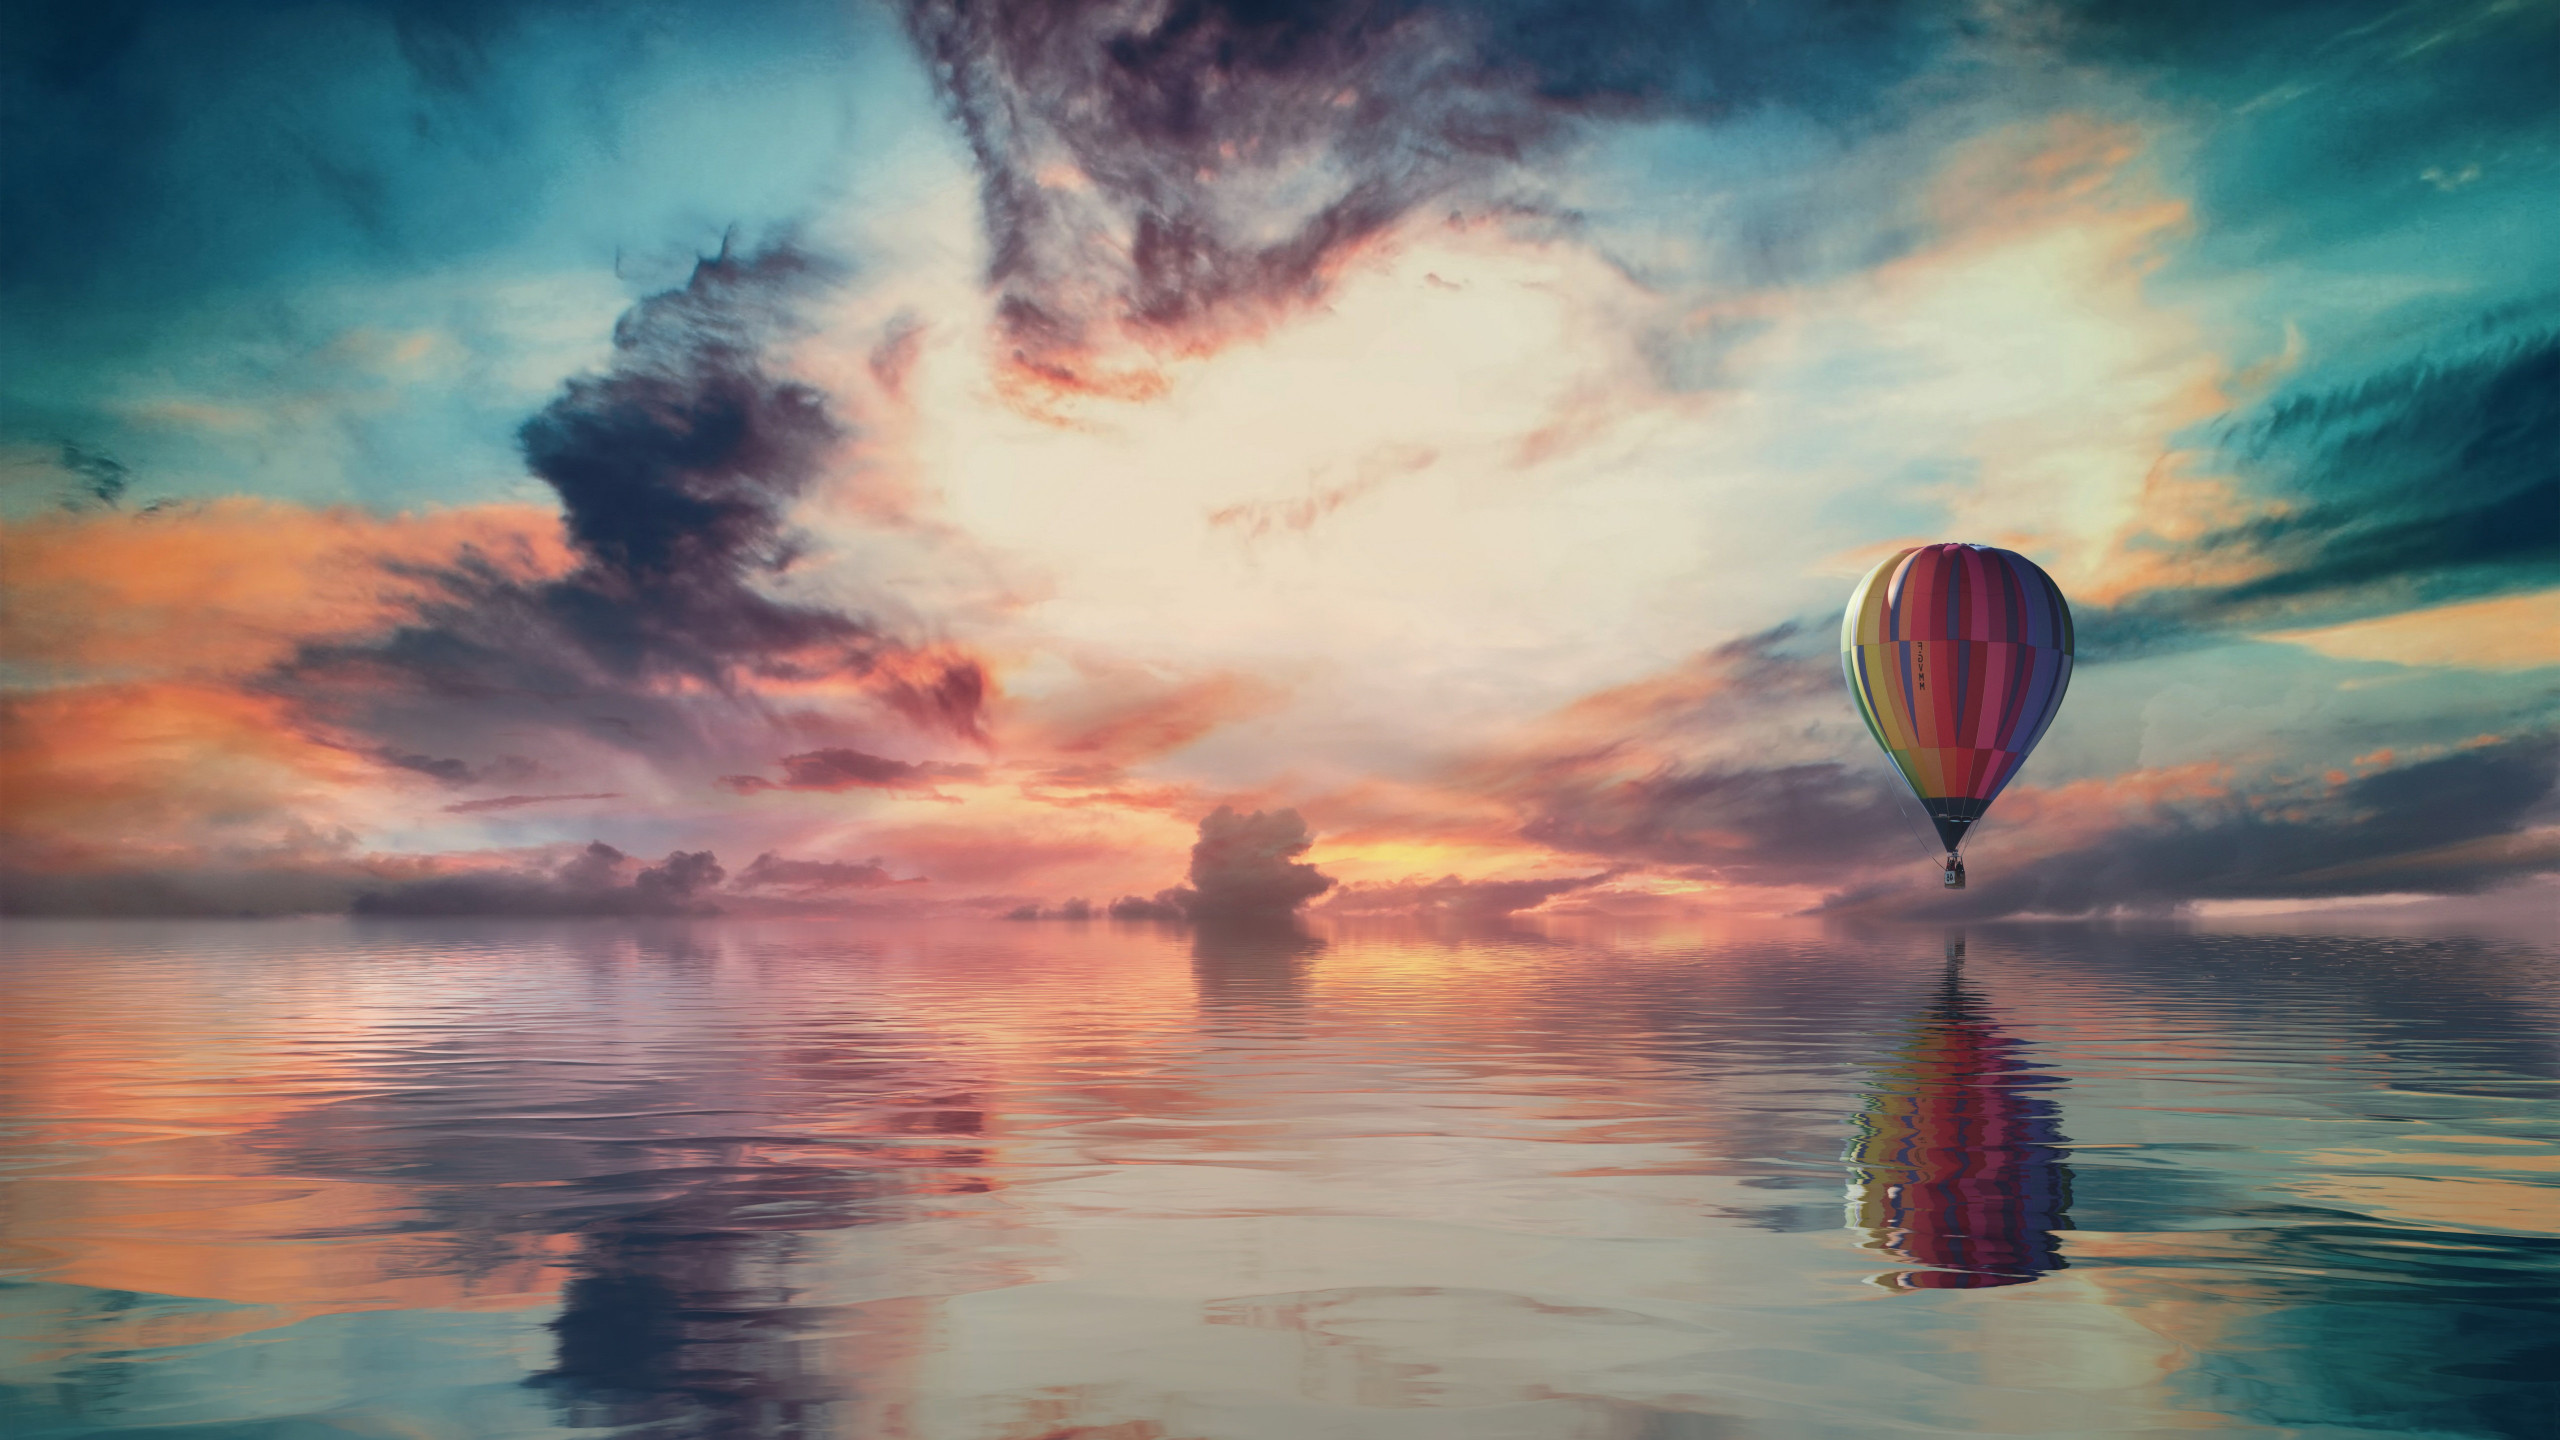 Fantasy travel with the hot air balloon wallpaper 2560x1440